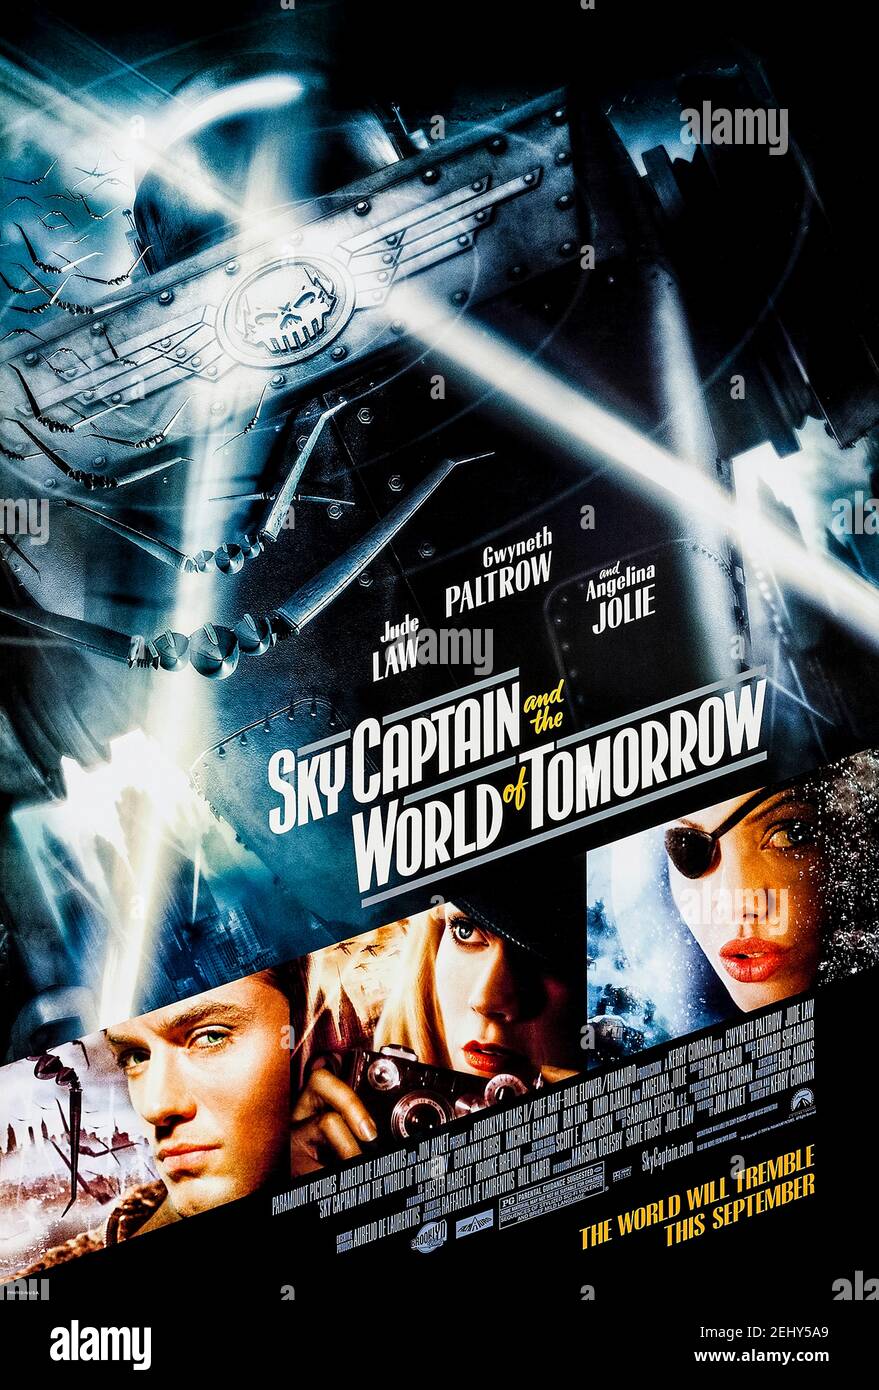 Sky Captain and the World of Tomorrow (2004) directed by Kerry Conran and starring Gwyneth Paltrow, Jude Law and Angelina Jolie. A reporter and pilot try to discover the origin of flying robots attacking New York City. Stock Photo